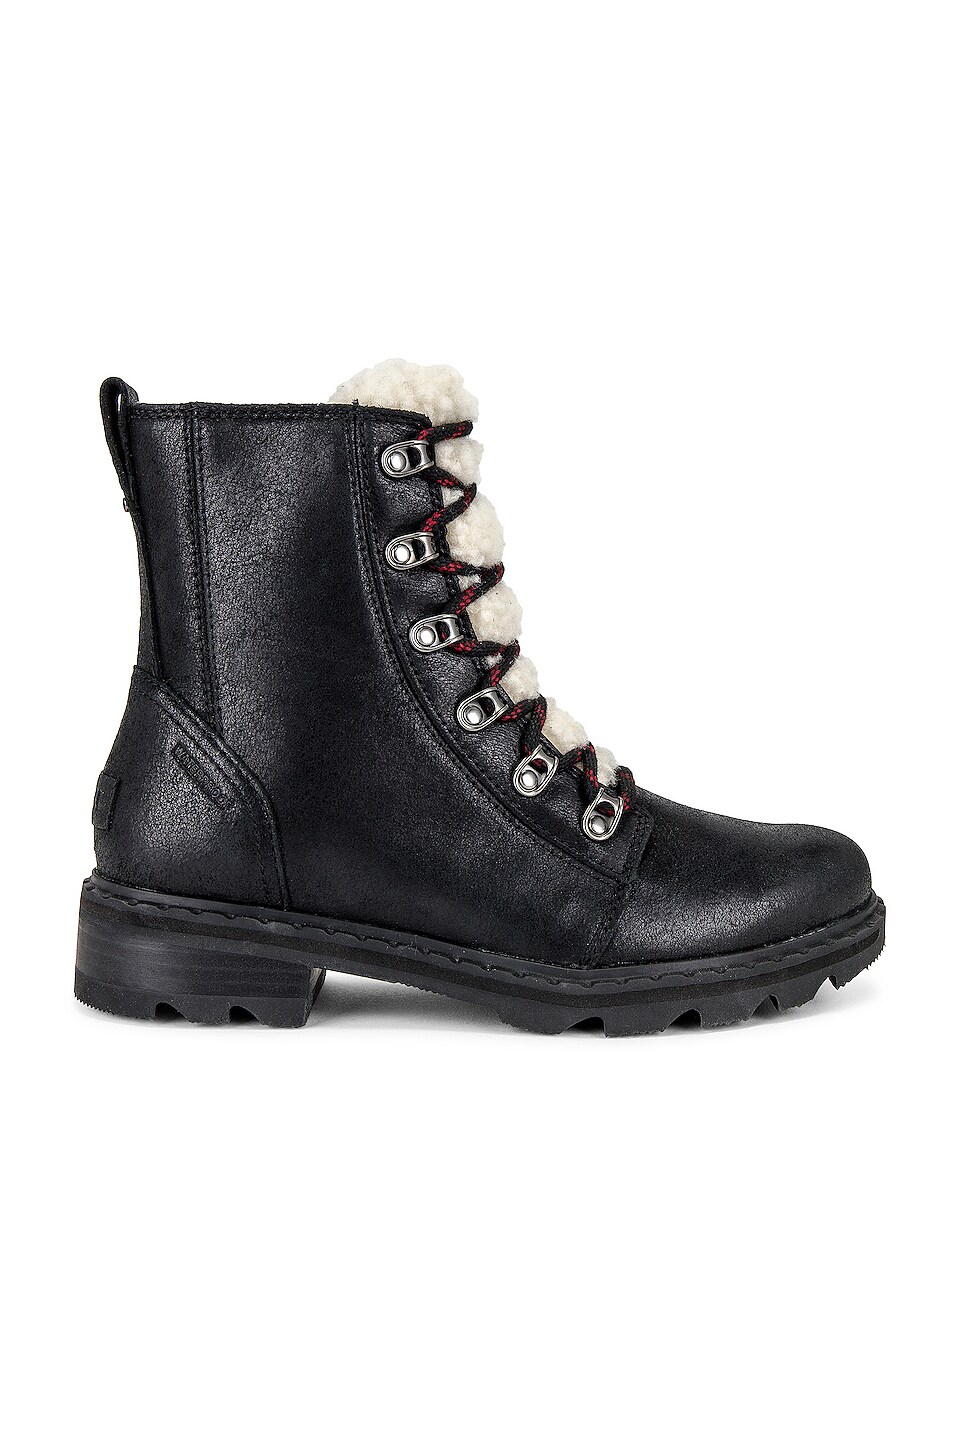 Sorel Shearling Lined Lennox Lace Cozy Boot in Black & Nocturnal | REVOLVE